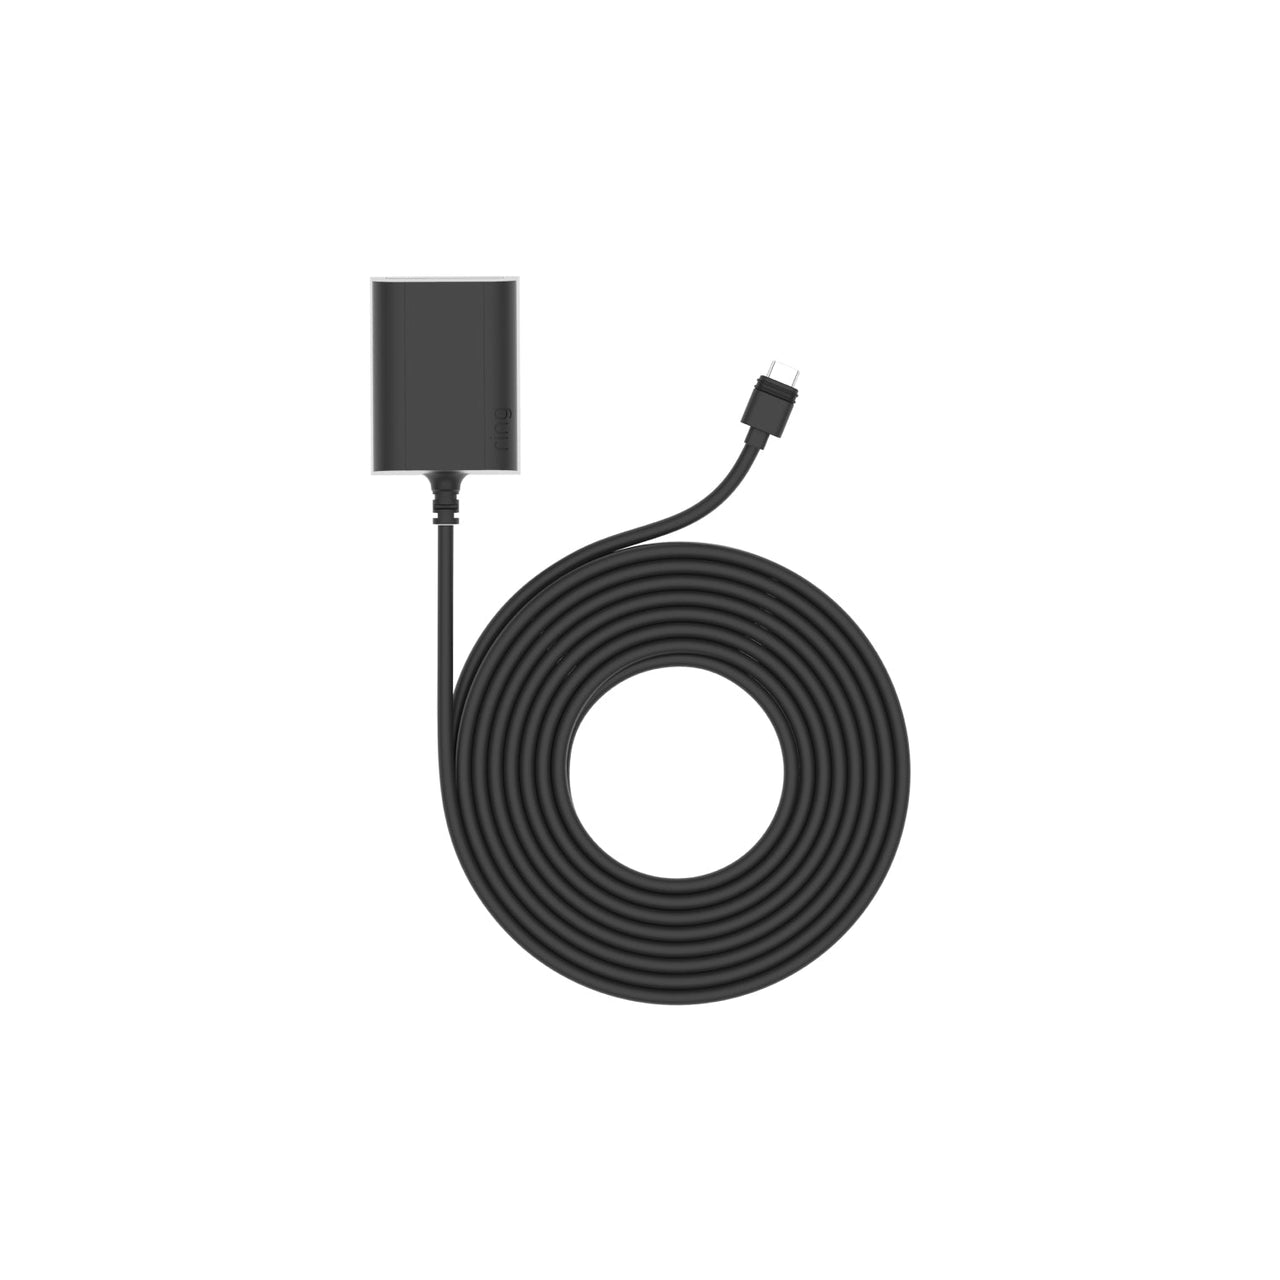 products/ring_indoor_outdoor_power_adapter_usb-c_indoor_blk_1500x1500_1_863541d7-3f2f-46df-b9cc-5768bc6960a3.jpg